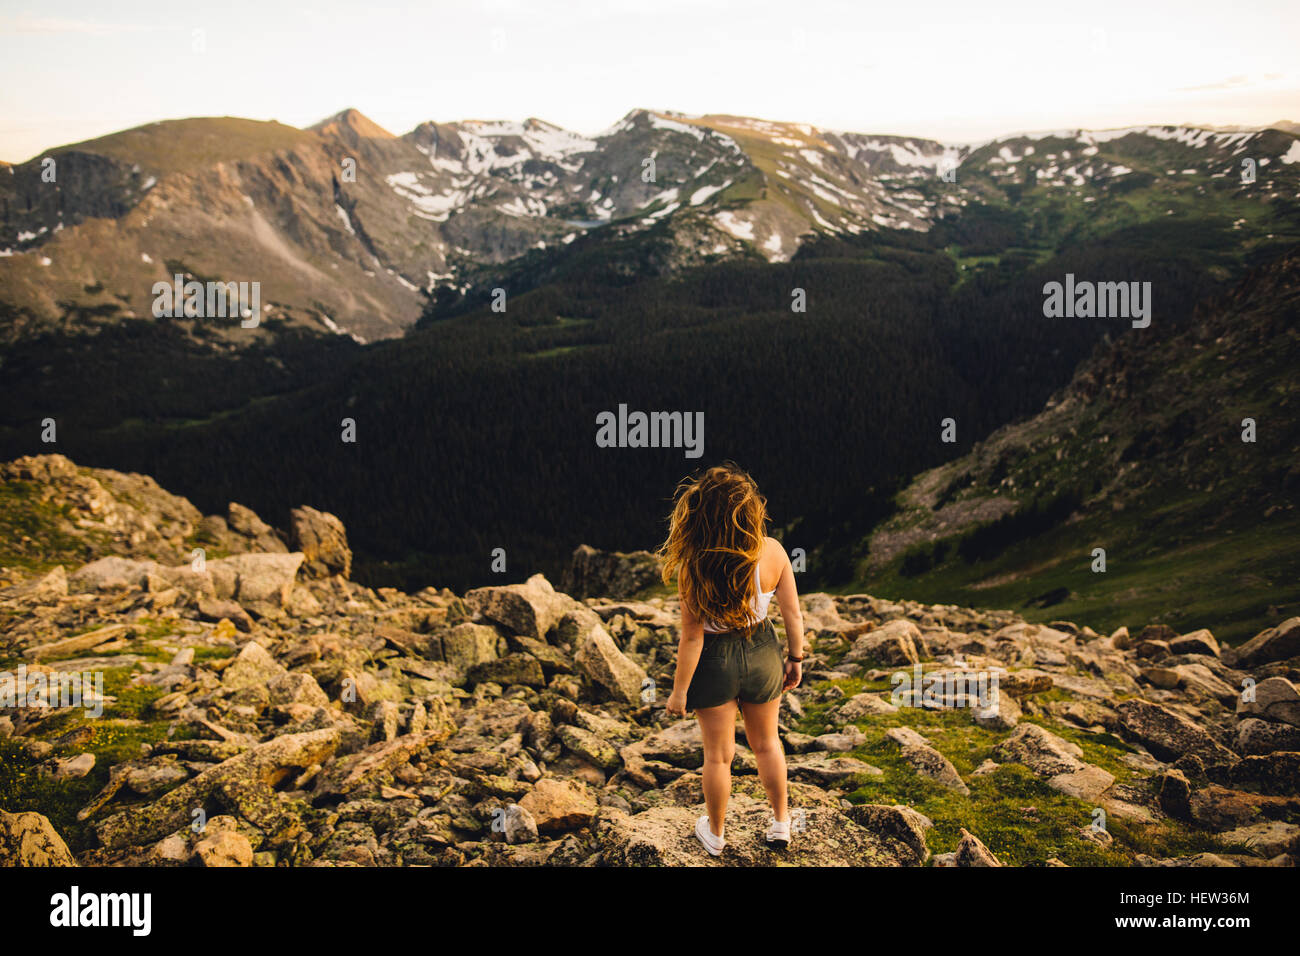 Rear view of woman on rocky outcrop looking at view, Rocky Mountain National Park, Colorado, USA Stock Photo